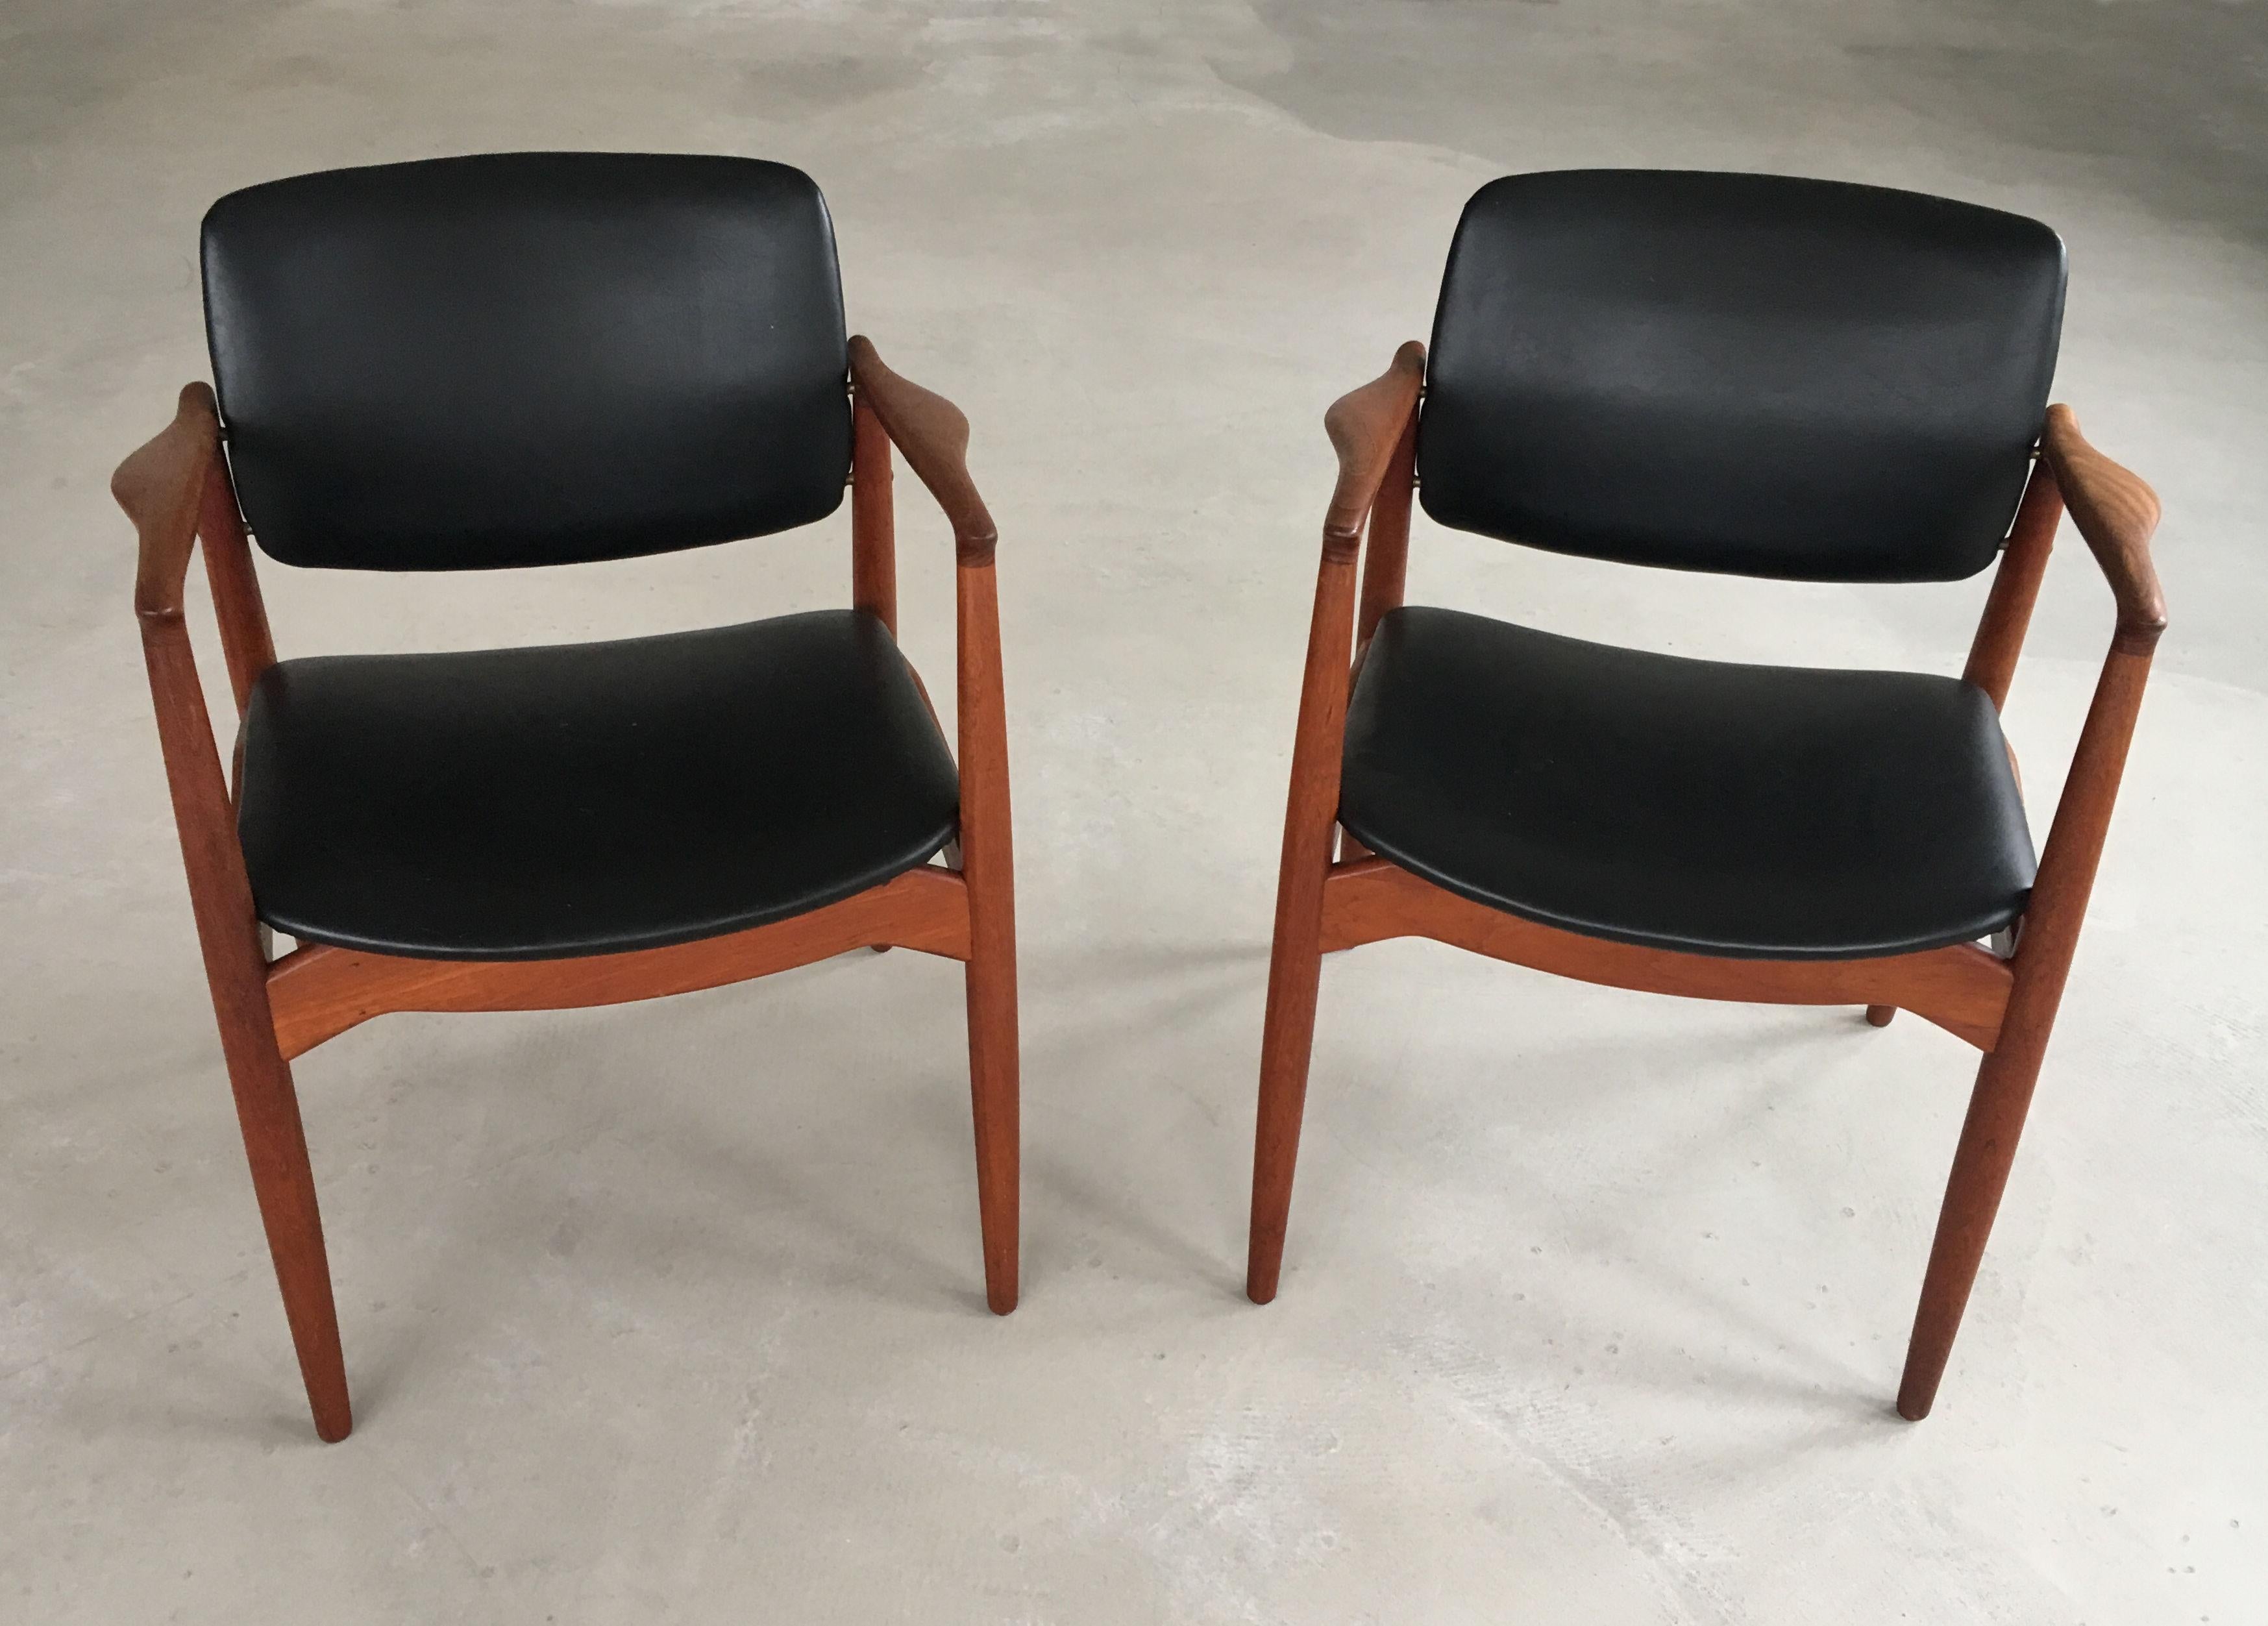 1960s Erik Buch Set of Two Fully restored Captains Chair, Custom Upholstery

The well designed organic shaped armchairs with their well shaped comfortable seats have been fully restored and refinished by our experienced cabinetmaker and will be